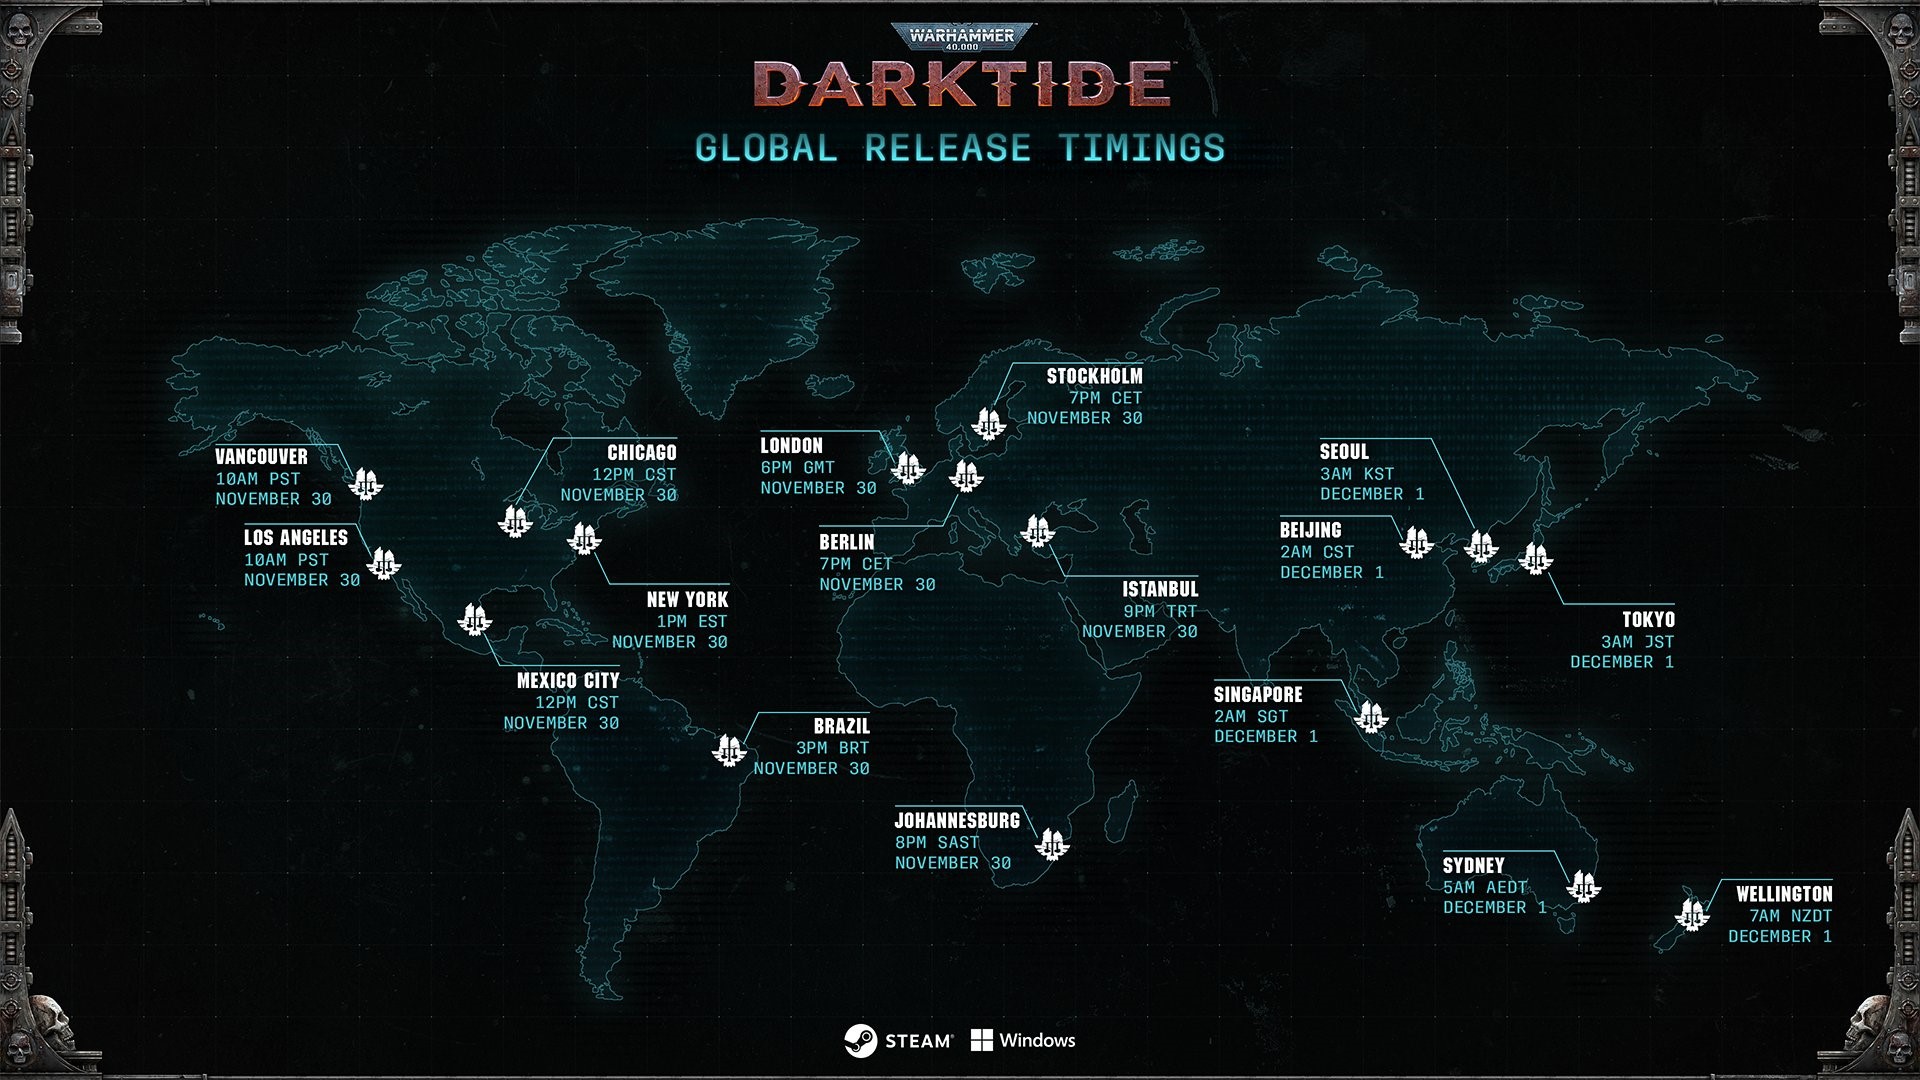 Map of Darktide release times with all regions